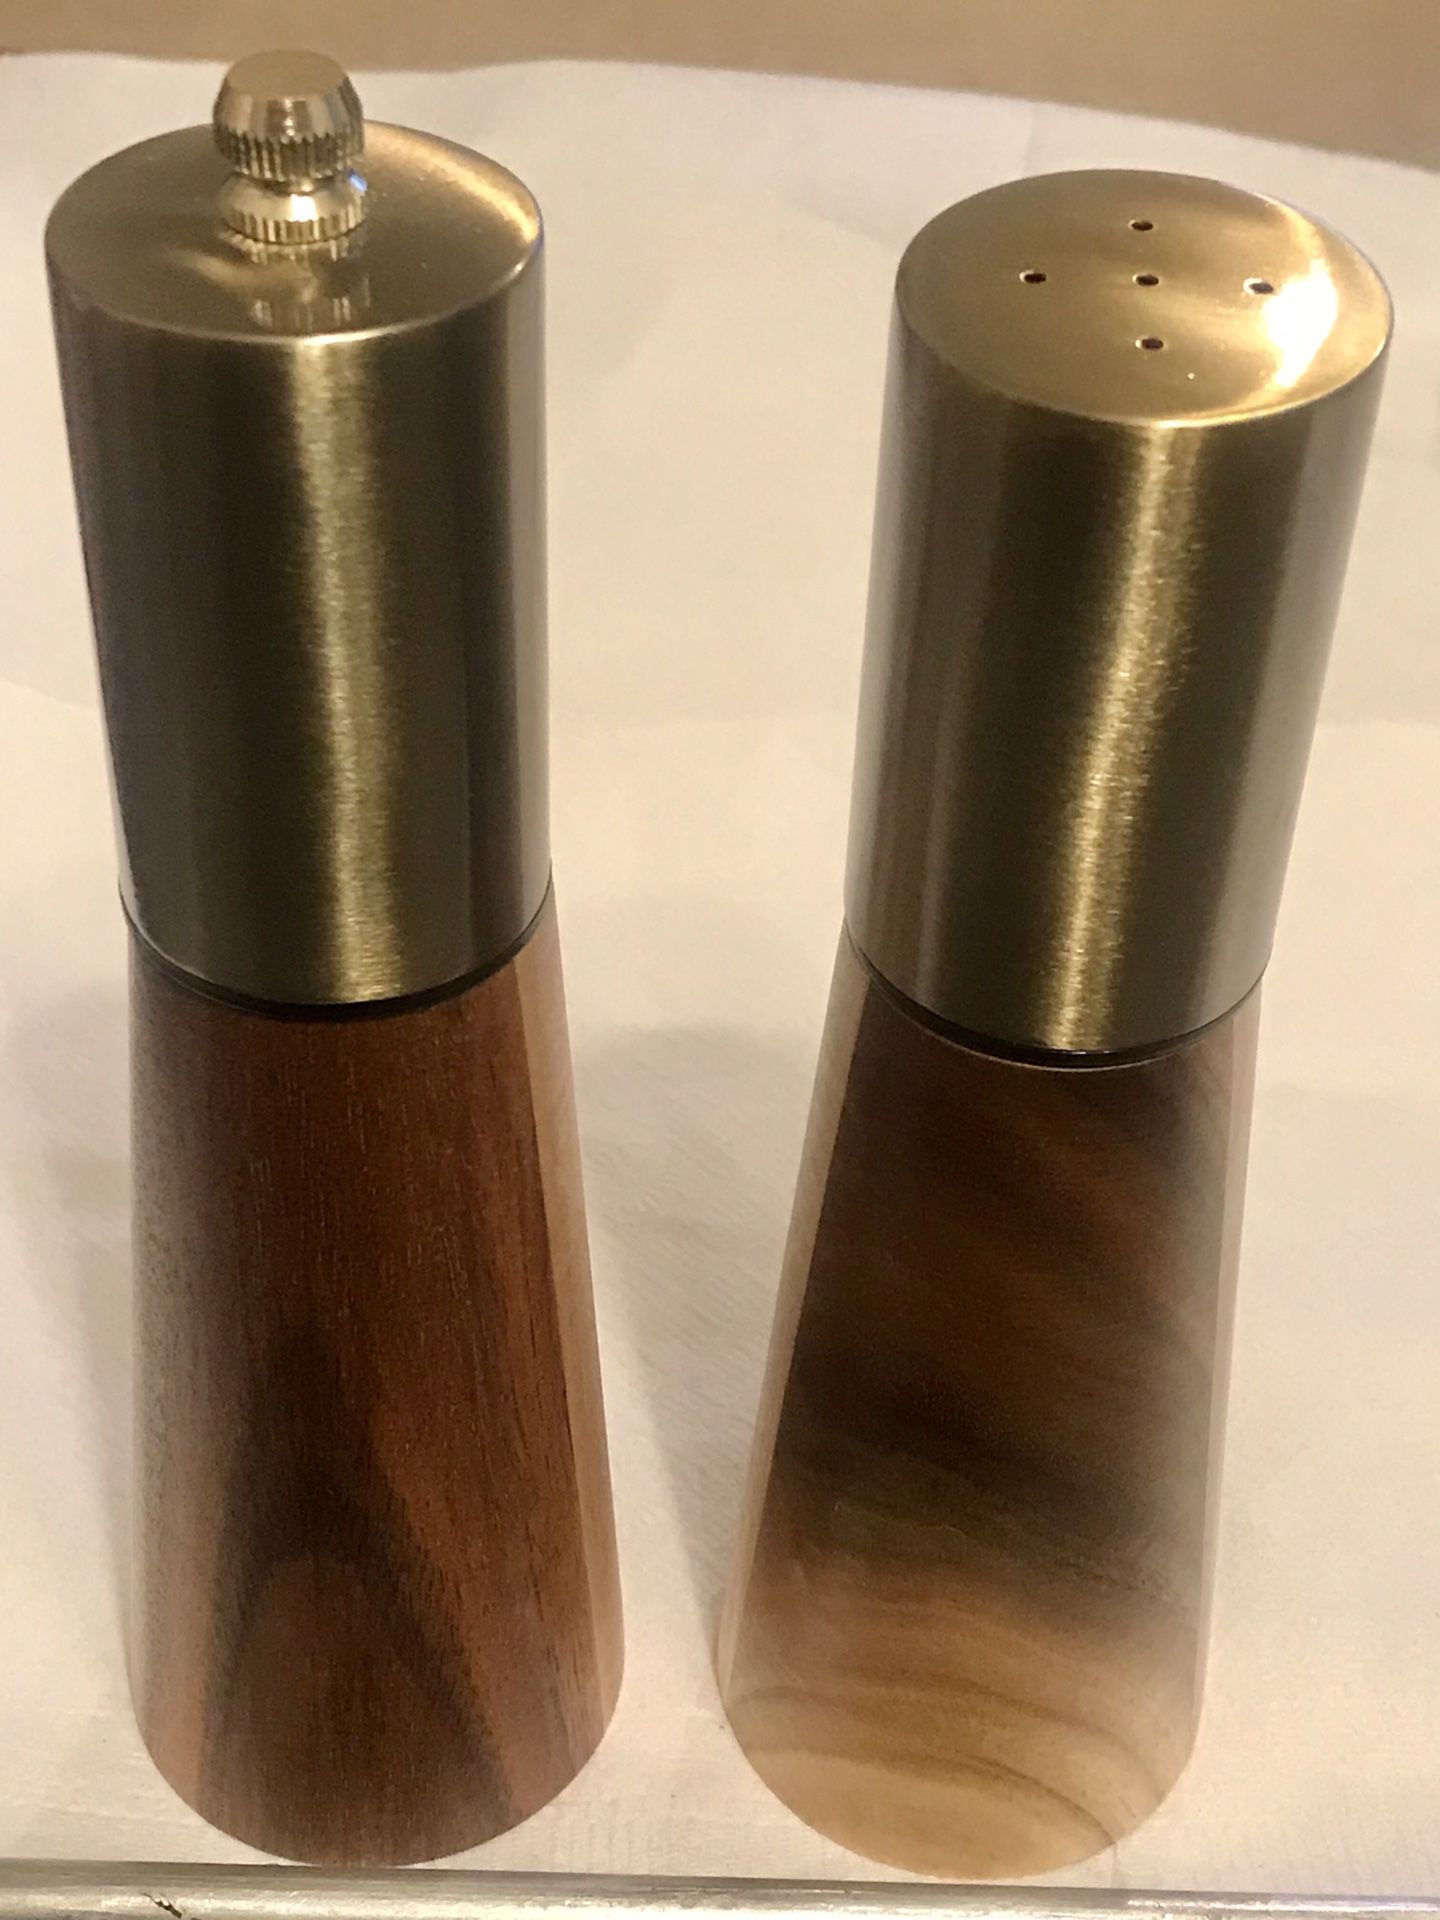 Wood and polished nickel salt shaker and pepper mill, peppercorn grinder NEW in box